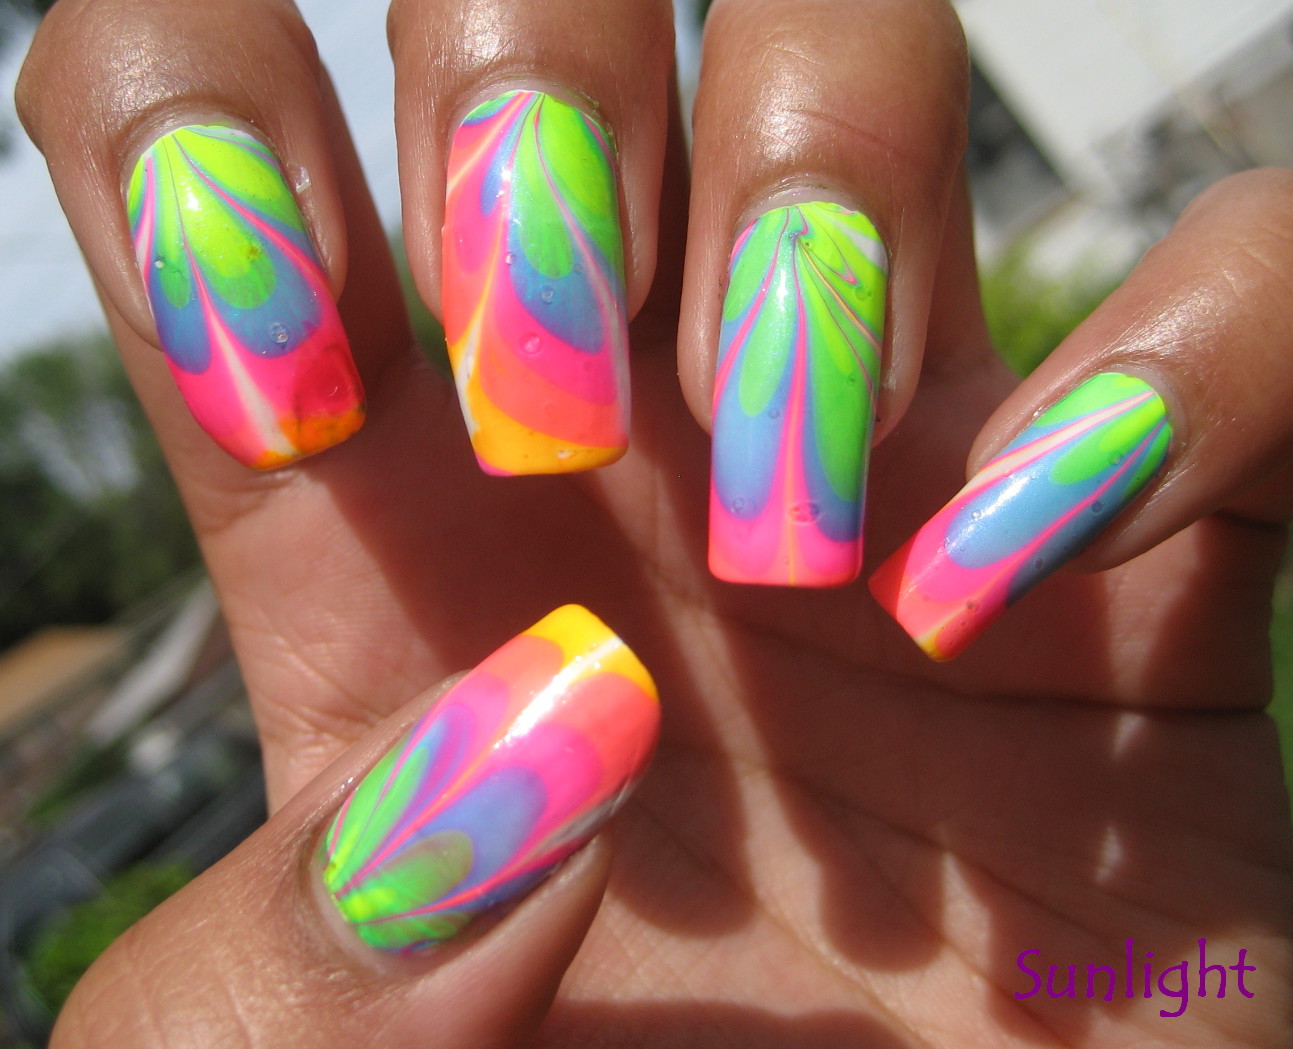 3. Short Nail Water Marble Tutorial - wide 3